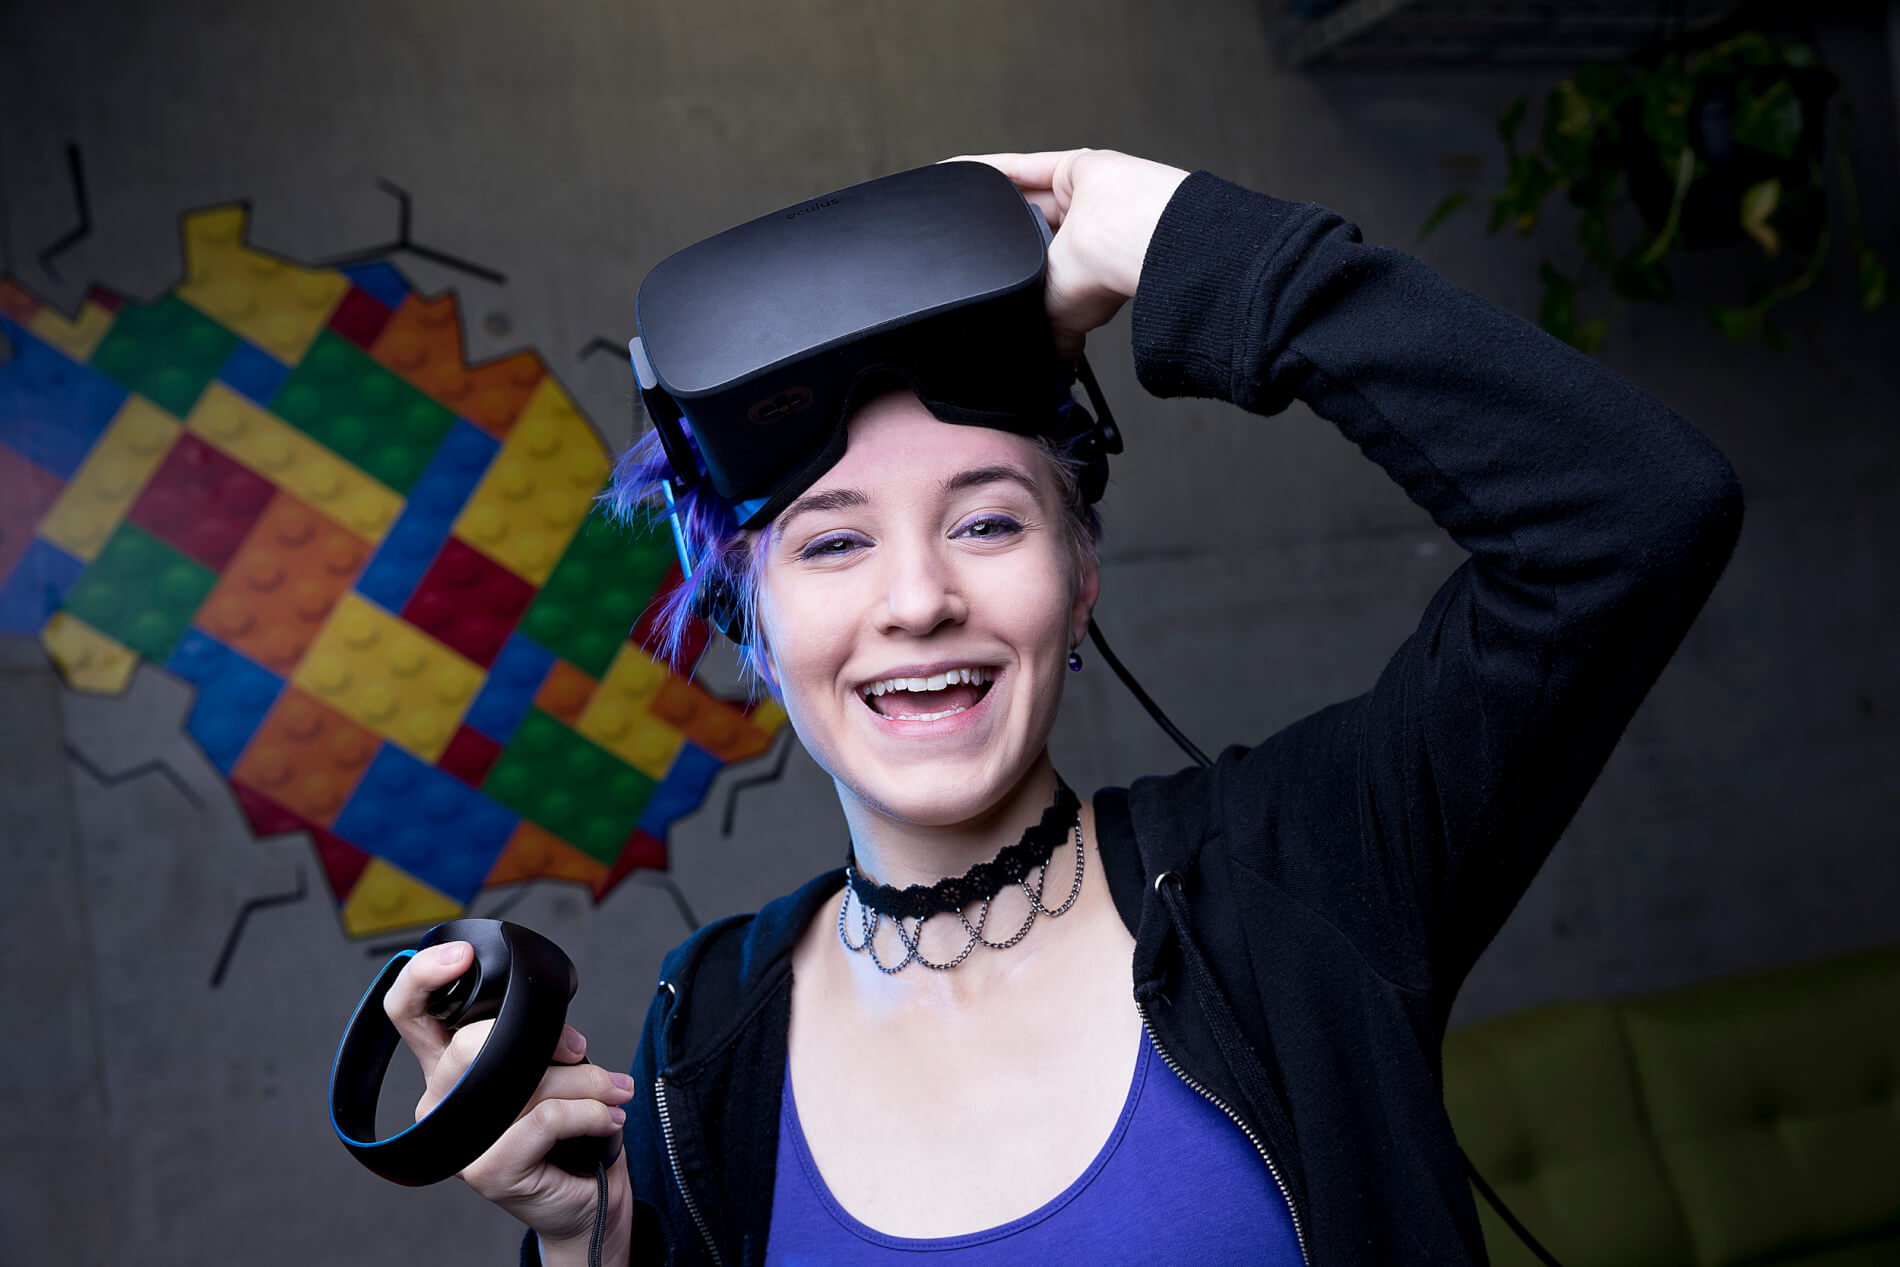 Games Student with ARVR headset